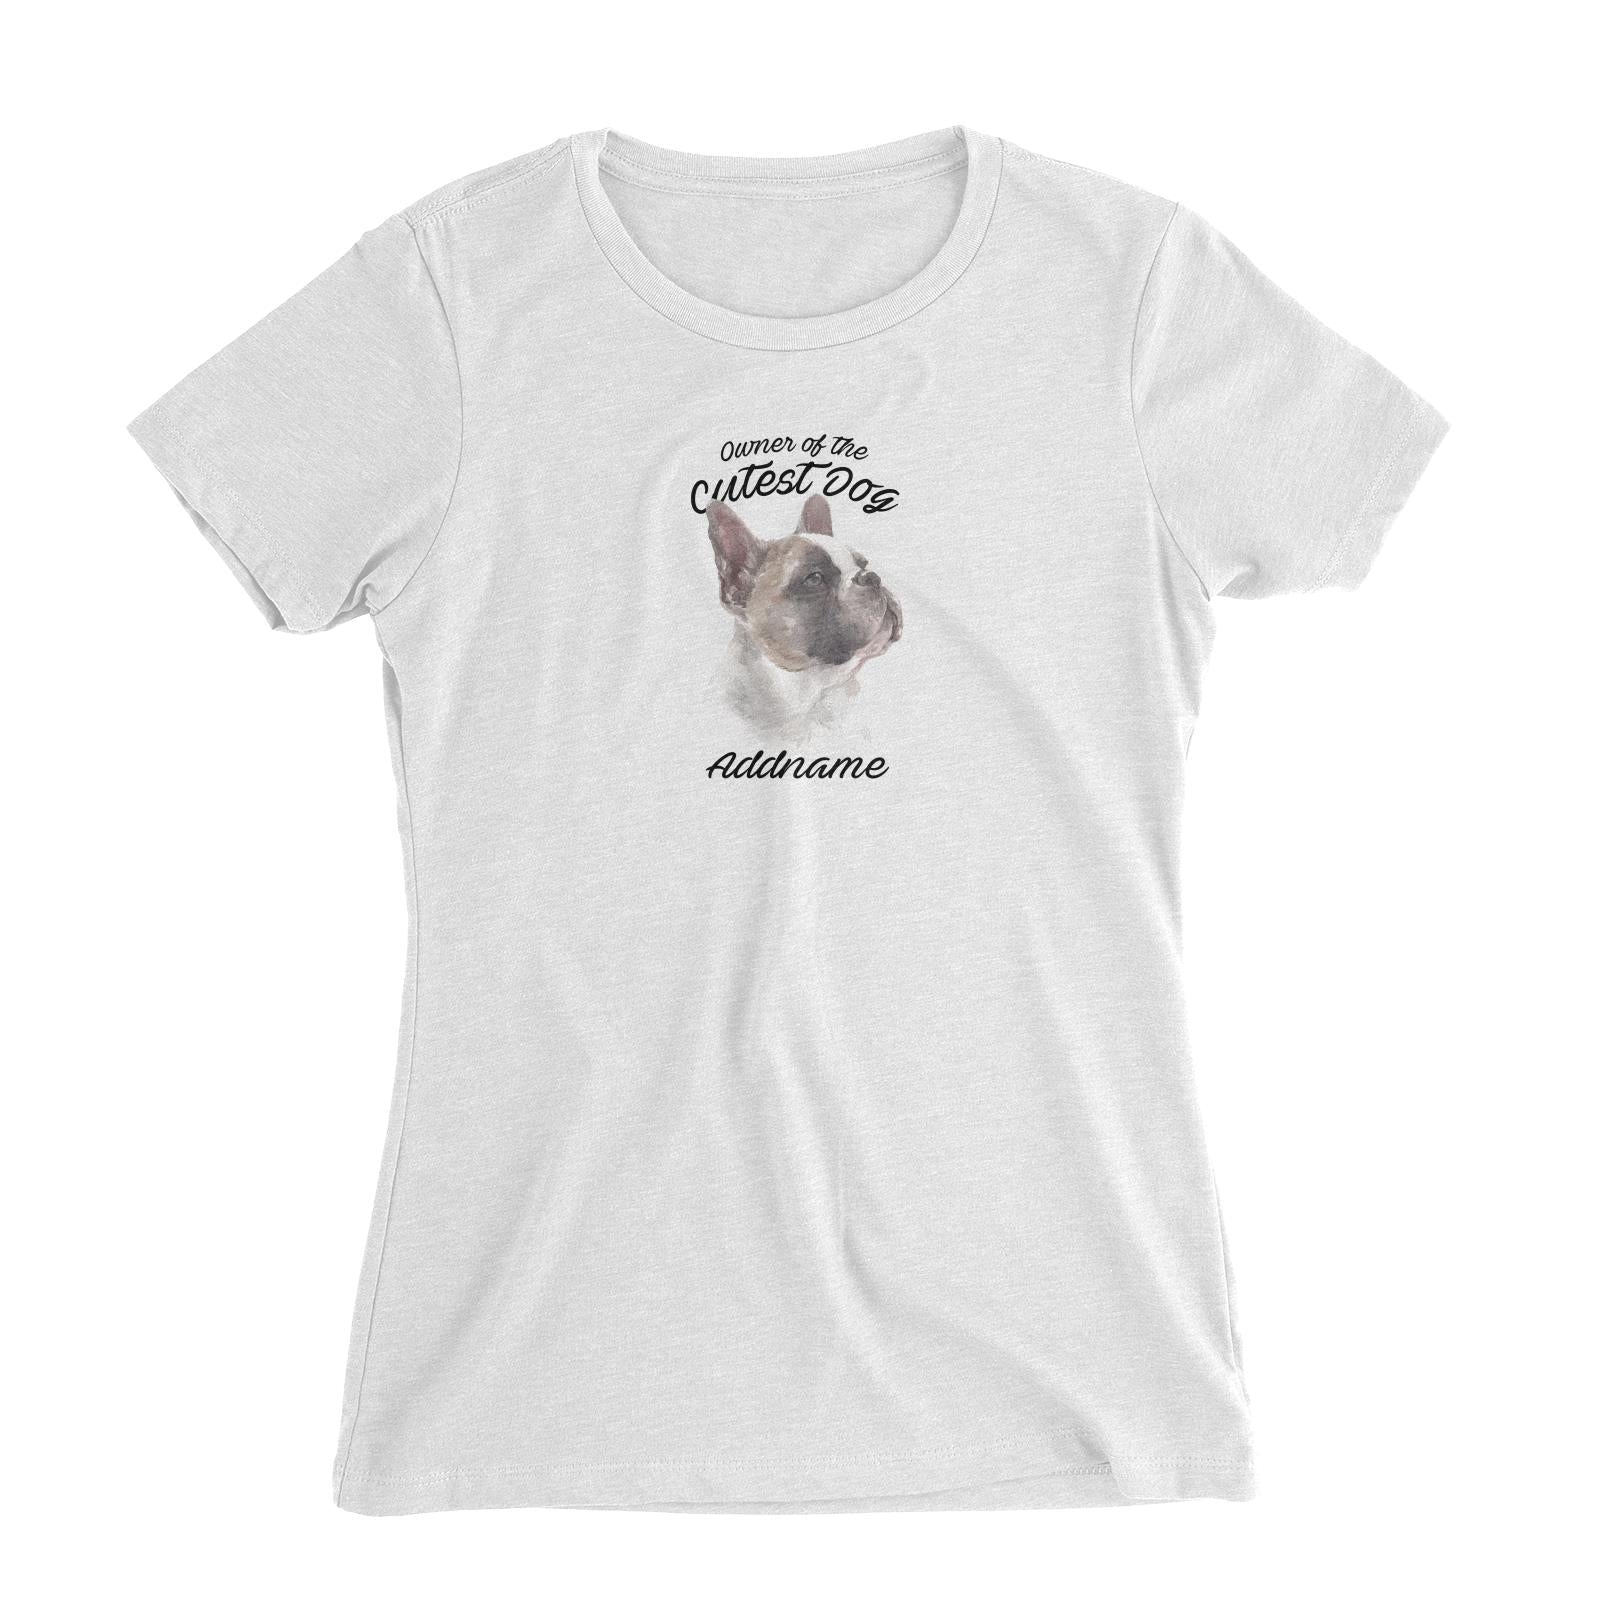 Watercolor Dog Owner Of The Cutest Dog French Bulldog Addname Women's Slim Fit T-Shirt